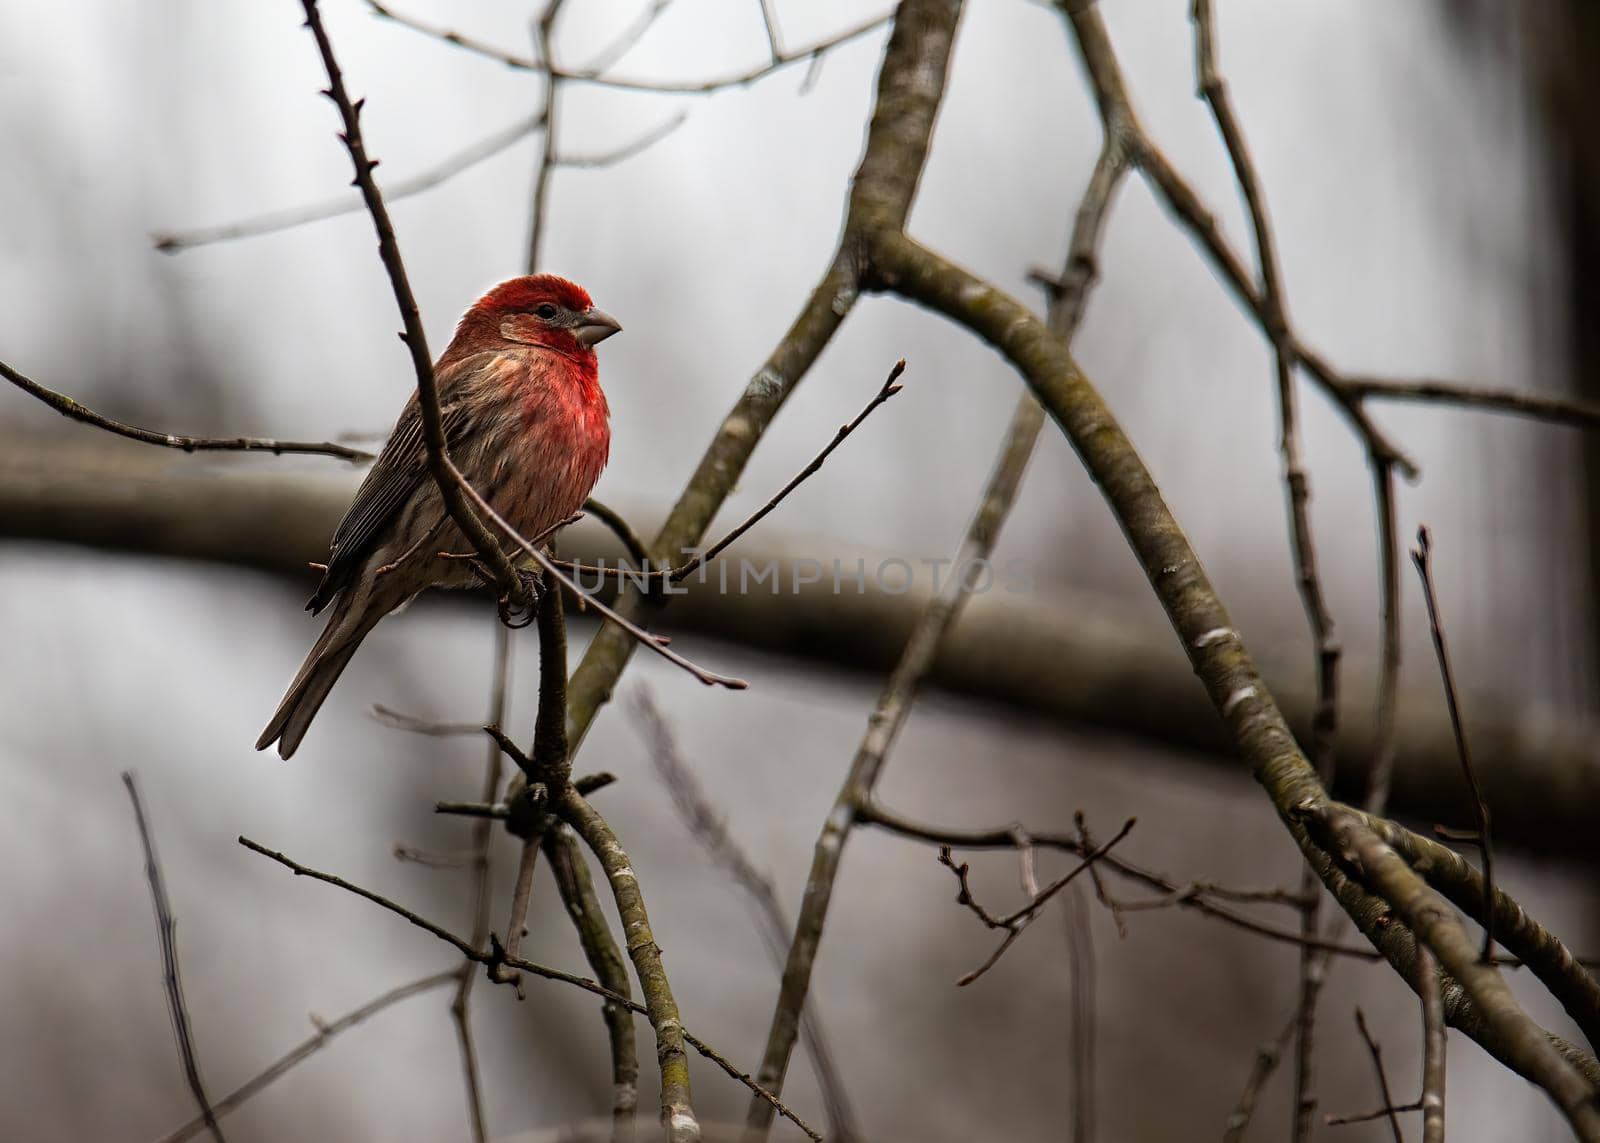 Male House Finch in the Woods by CharlieFloyd